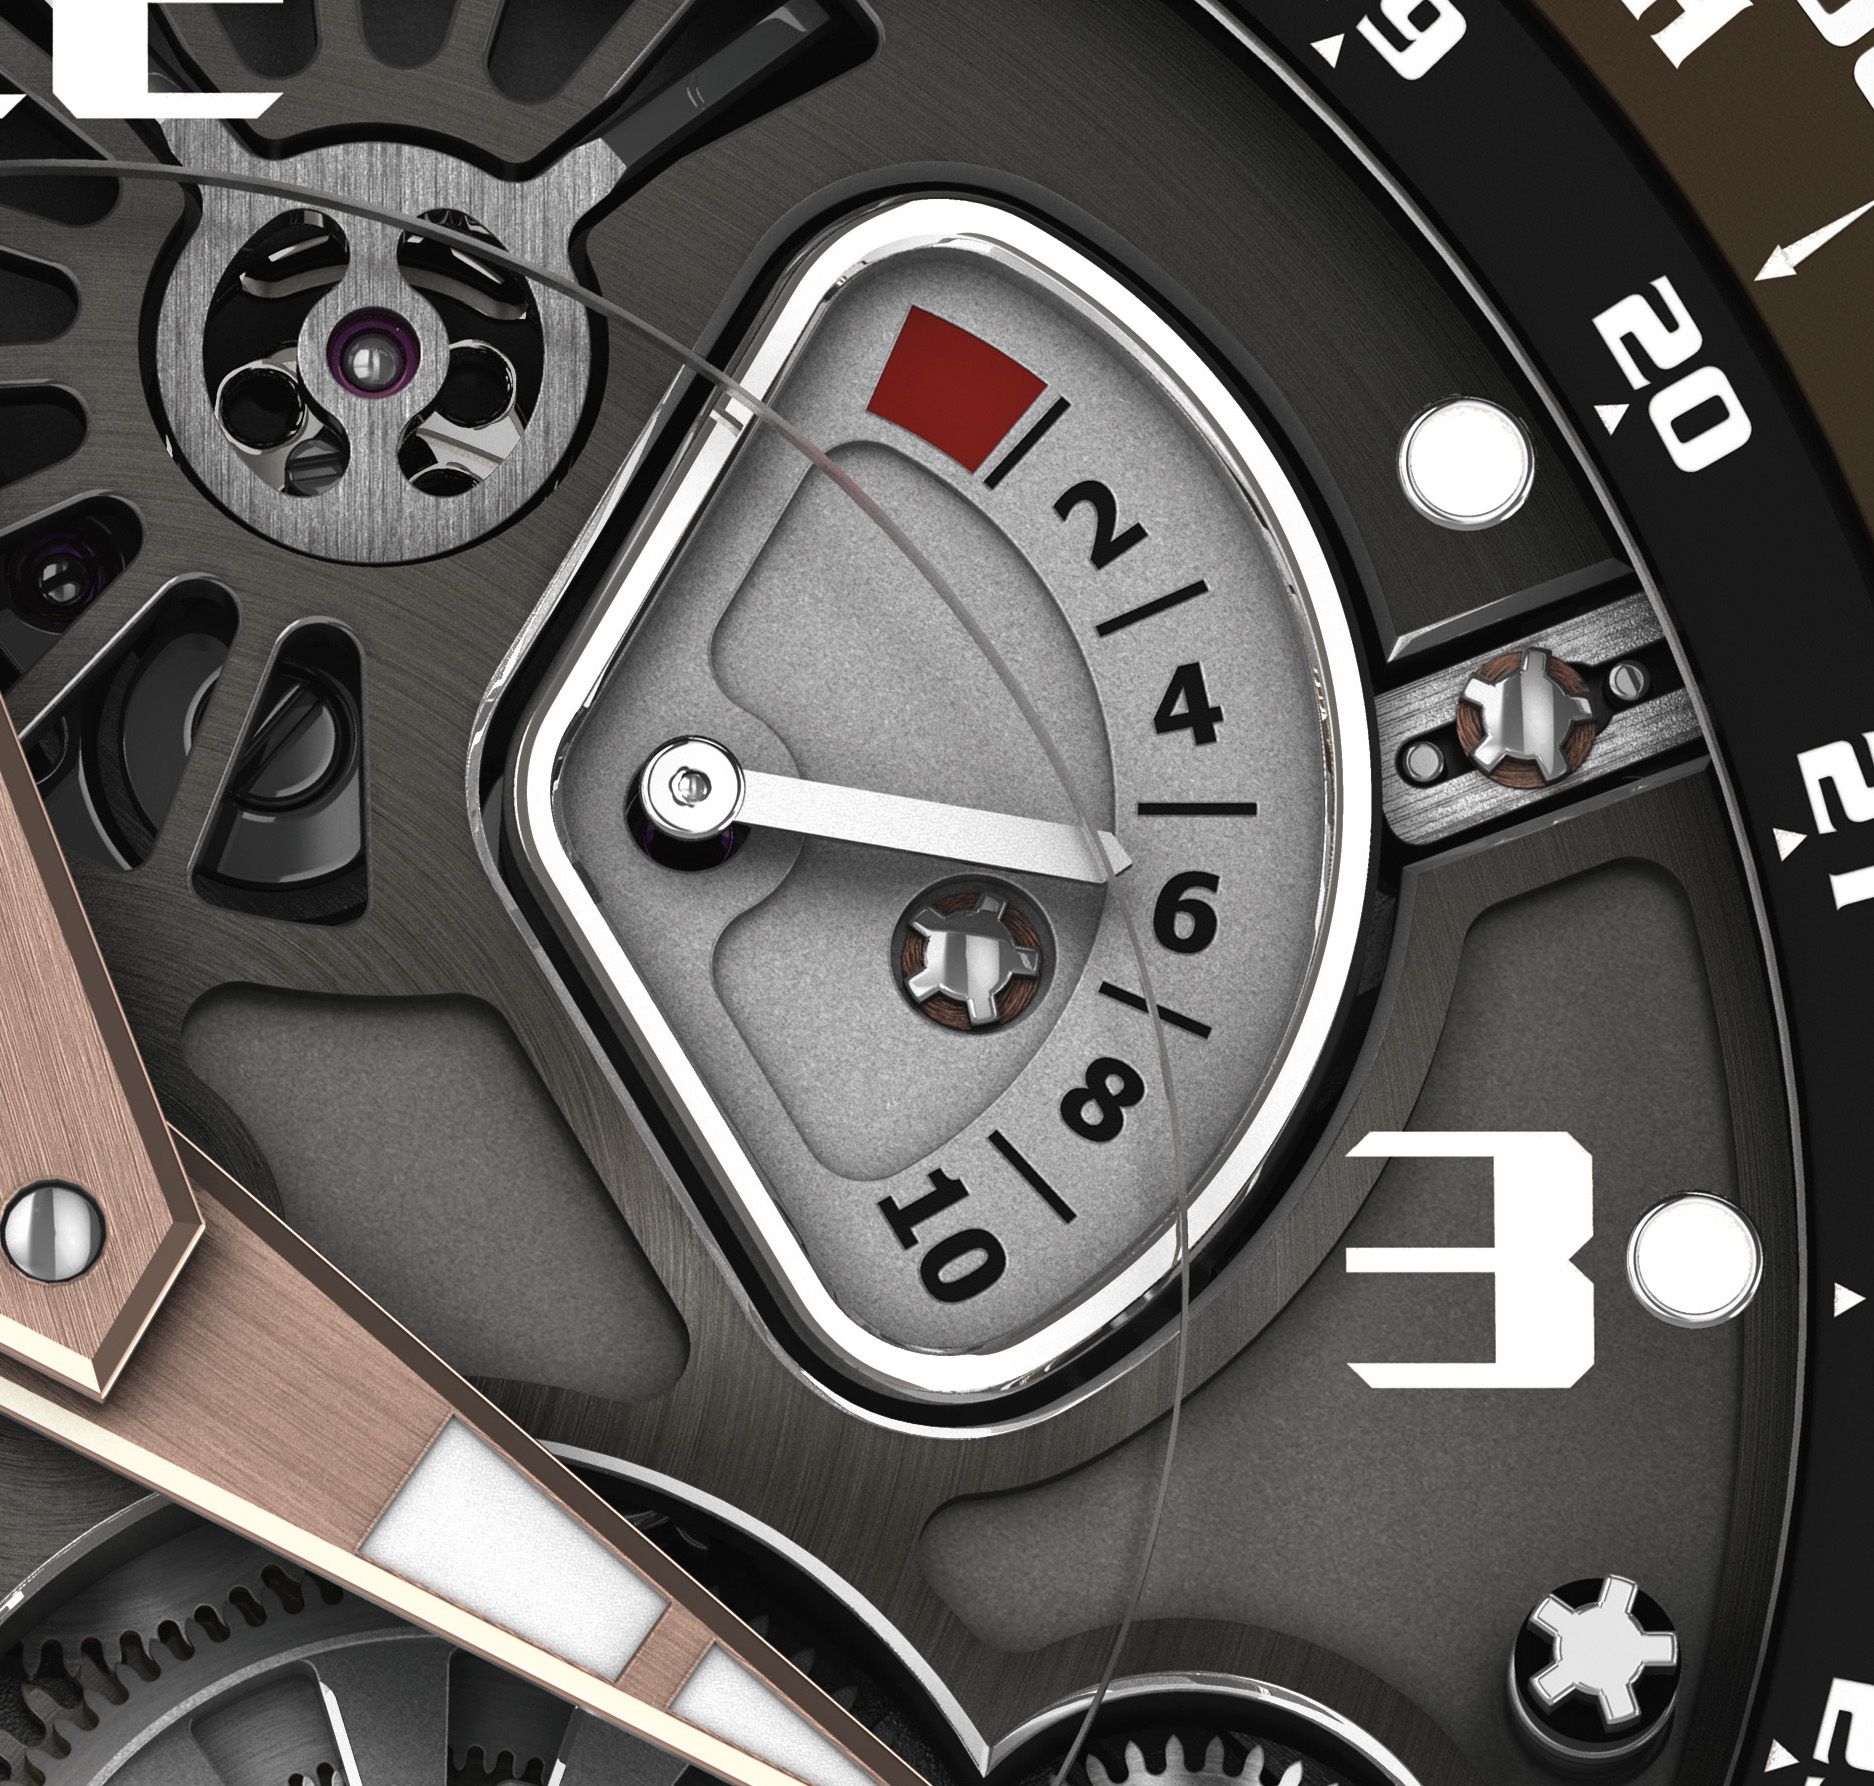 Richard Mille RM 11-03 McLaren 03/2019Richard Mille RM 11-03 McLaren Flyback Chronograph Carbon